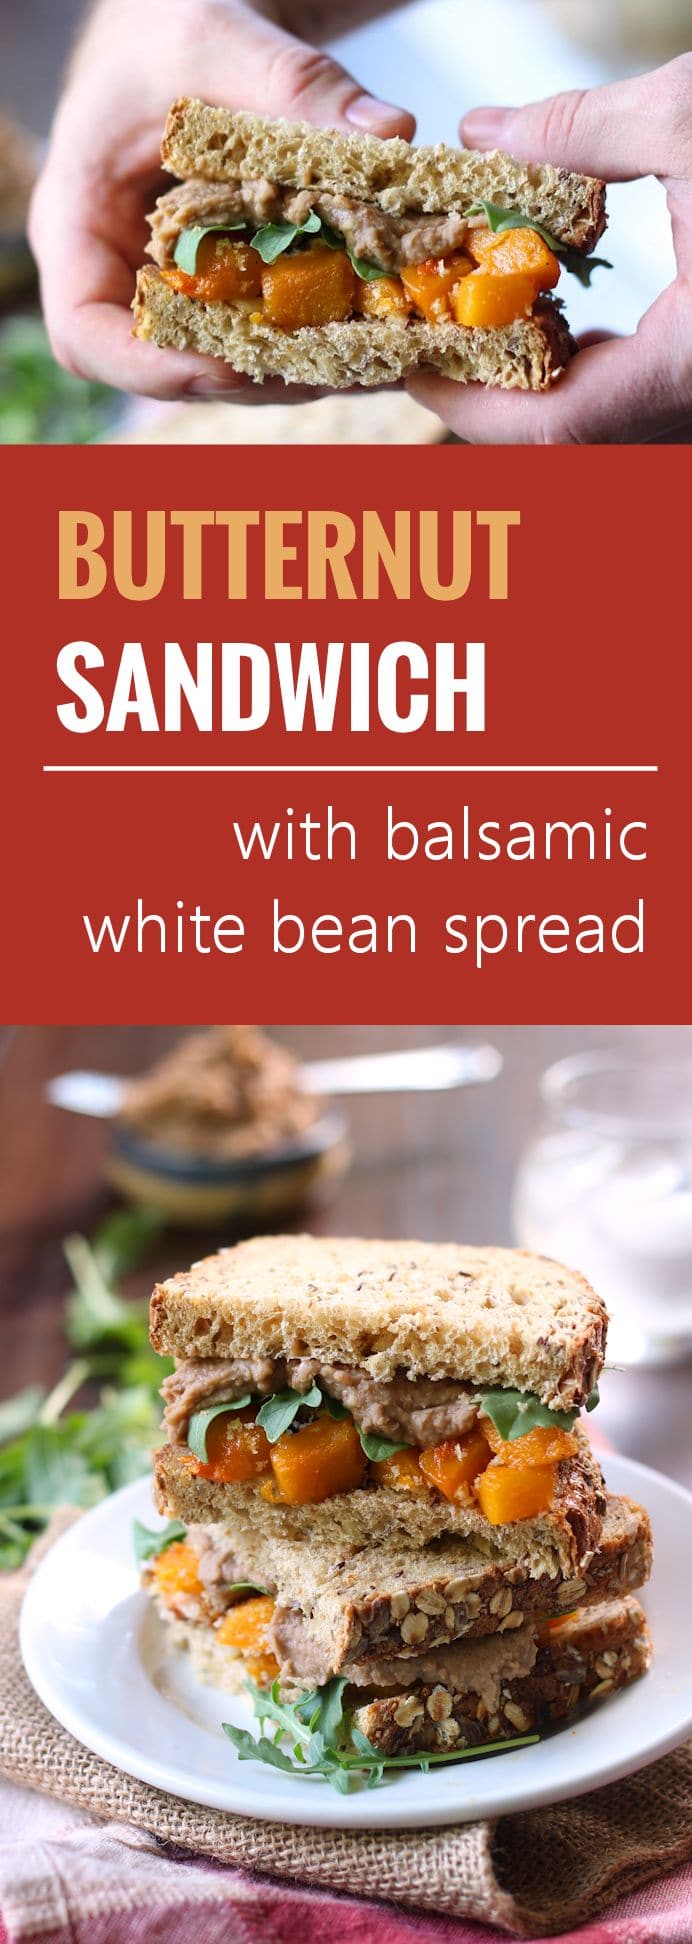 Roasted Butternut Squash Sandwiches with Balsamic White Bean Spread